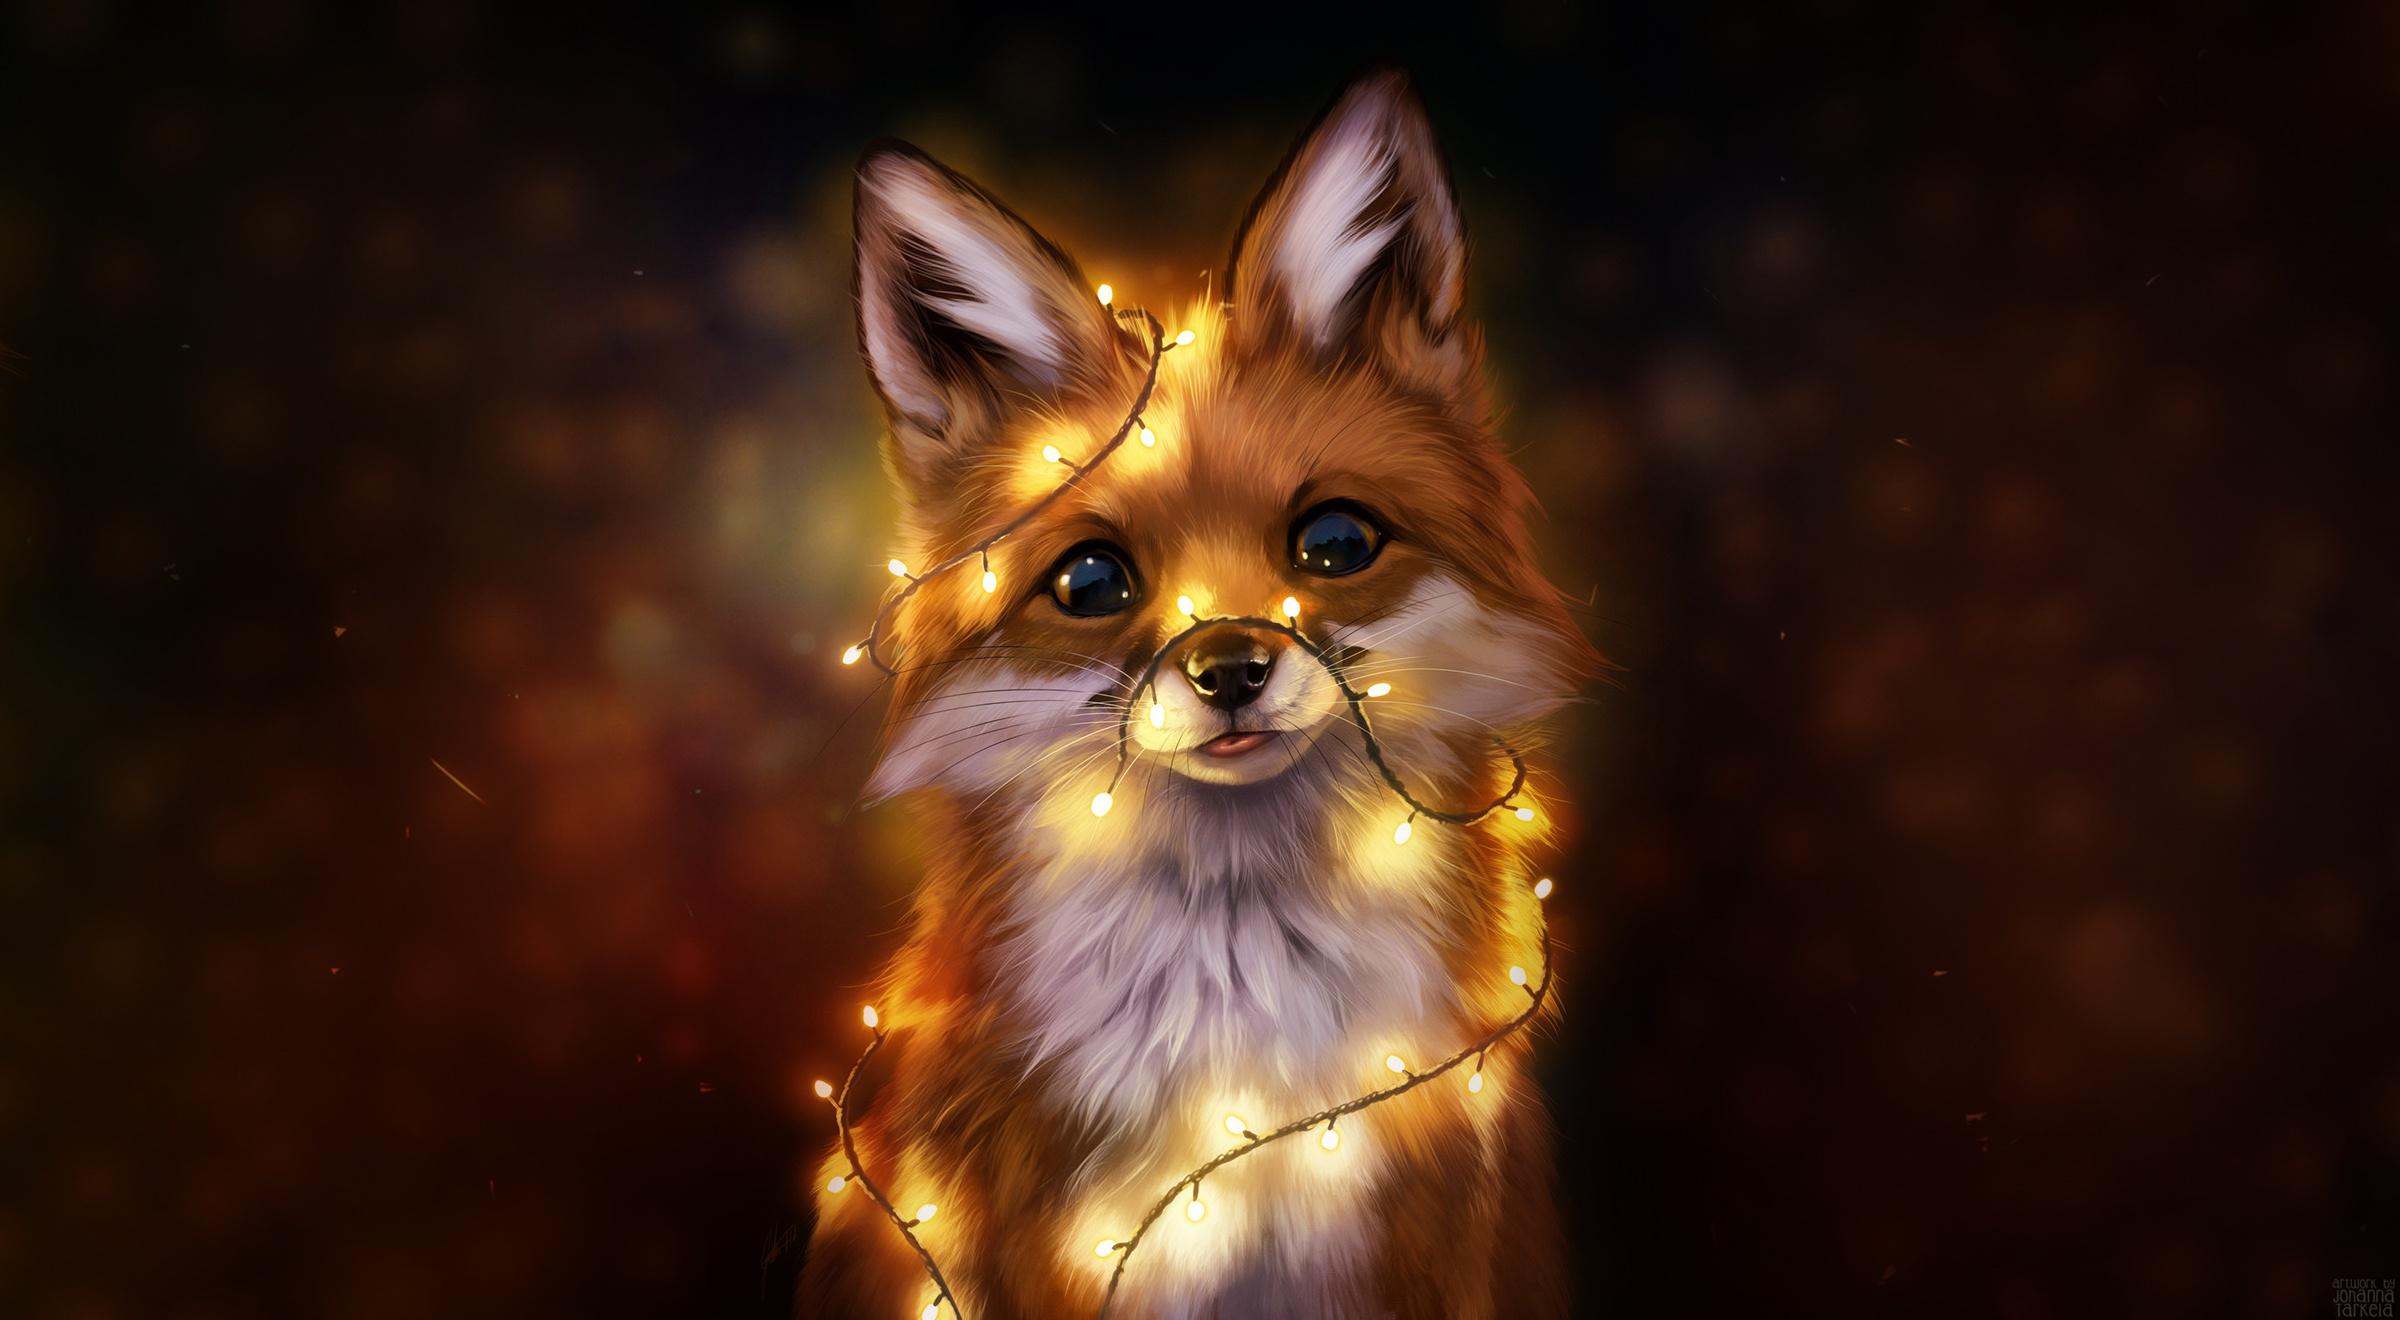 Cute Anime Fox Wallpapers - Wallpaper Cave